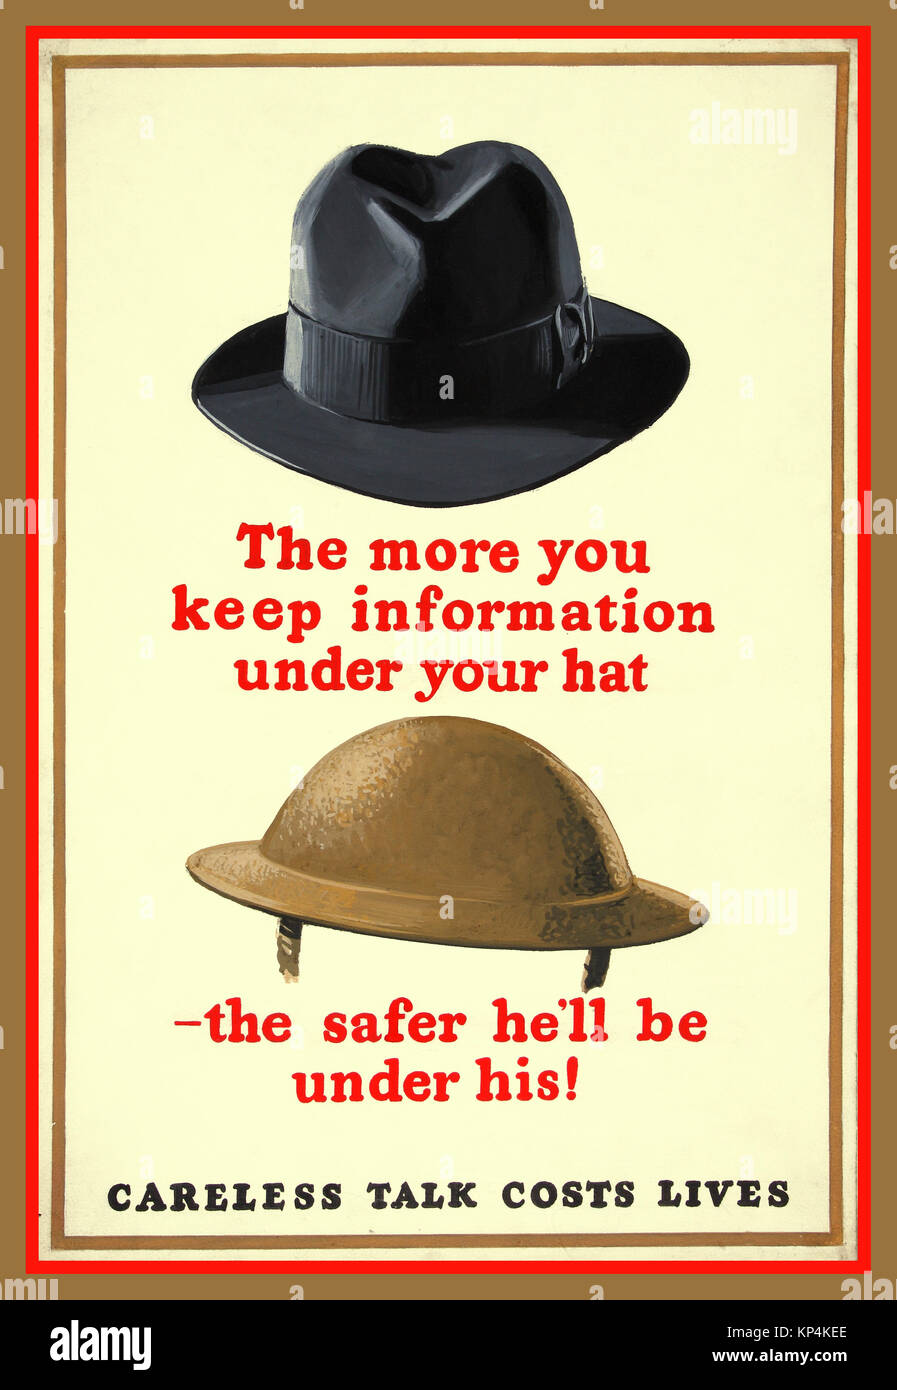 1940's WW2 British UK Propaganda poster Anti-rumour and careless talk 'The more you keep information under your hat, the safer he'll be under his' CARELESS TALK COSTS LIVES' World War 2 Stock Photo